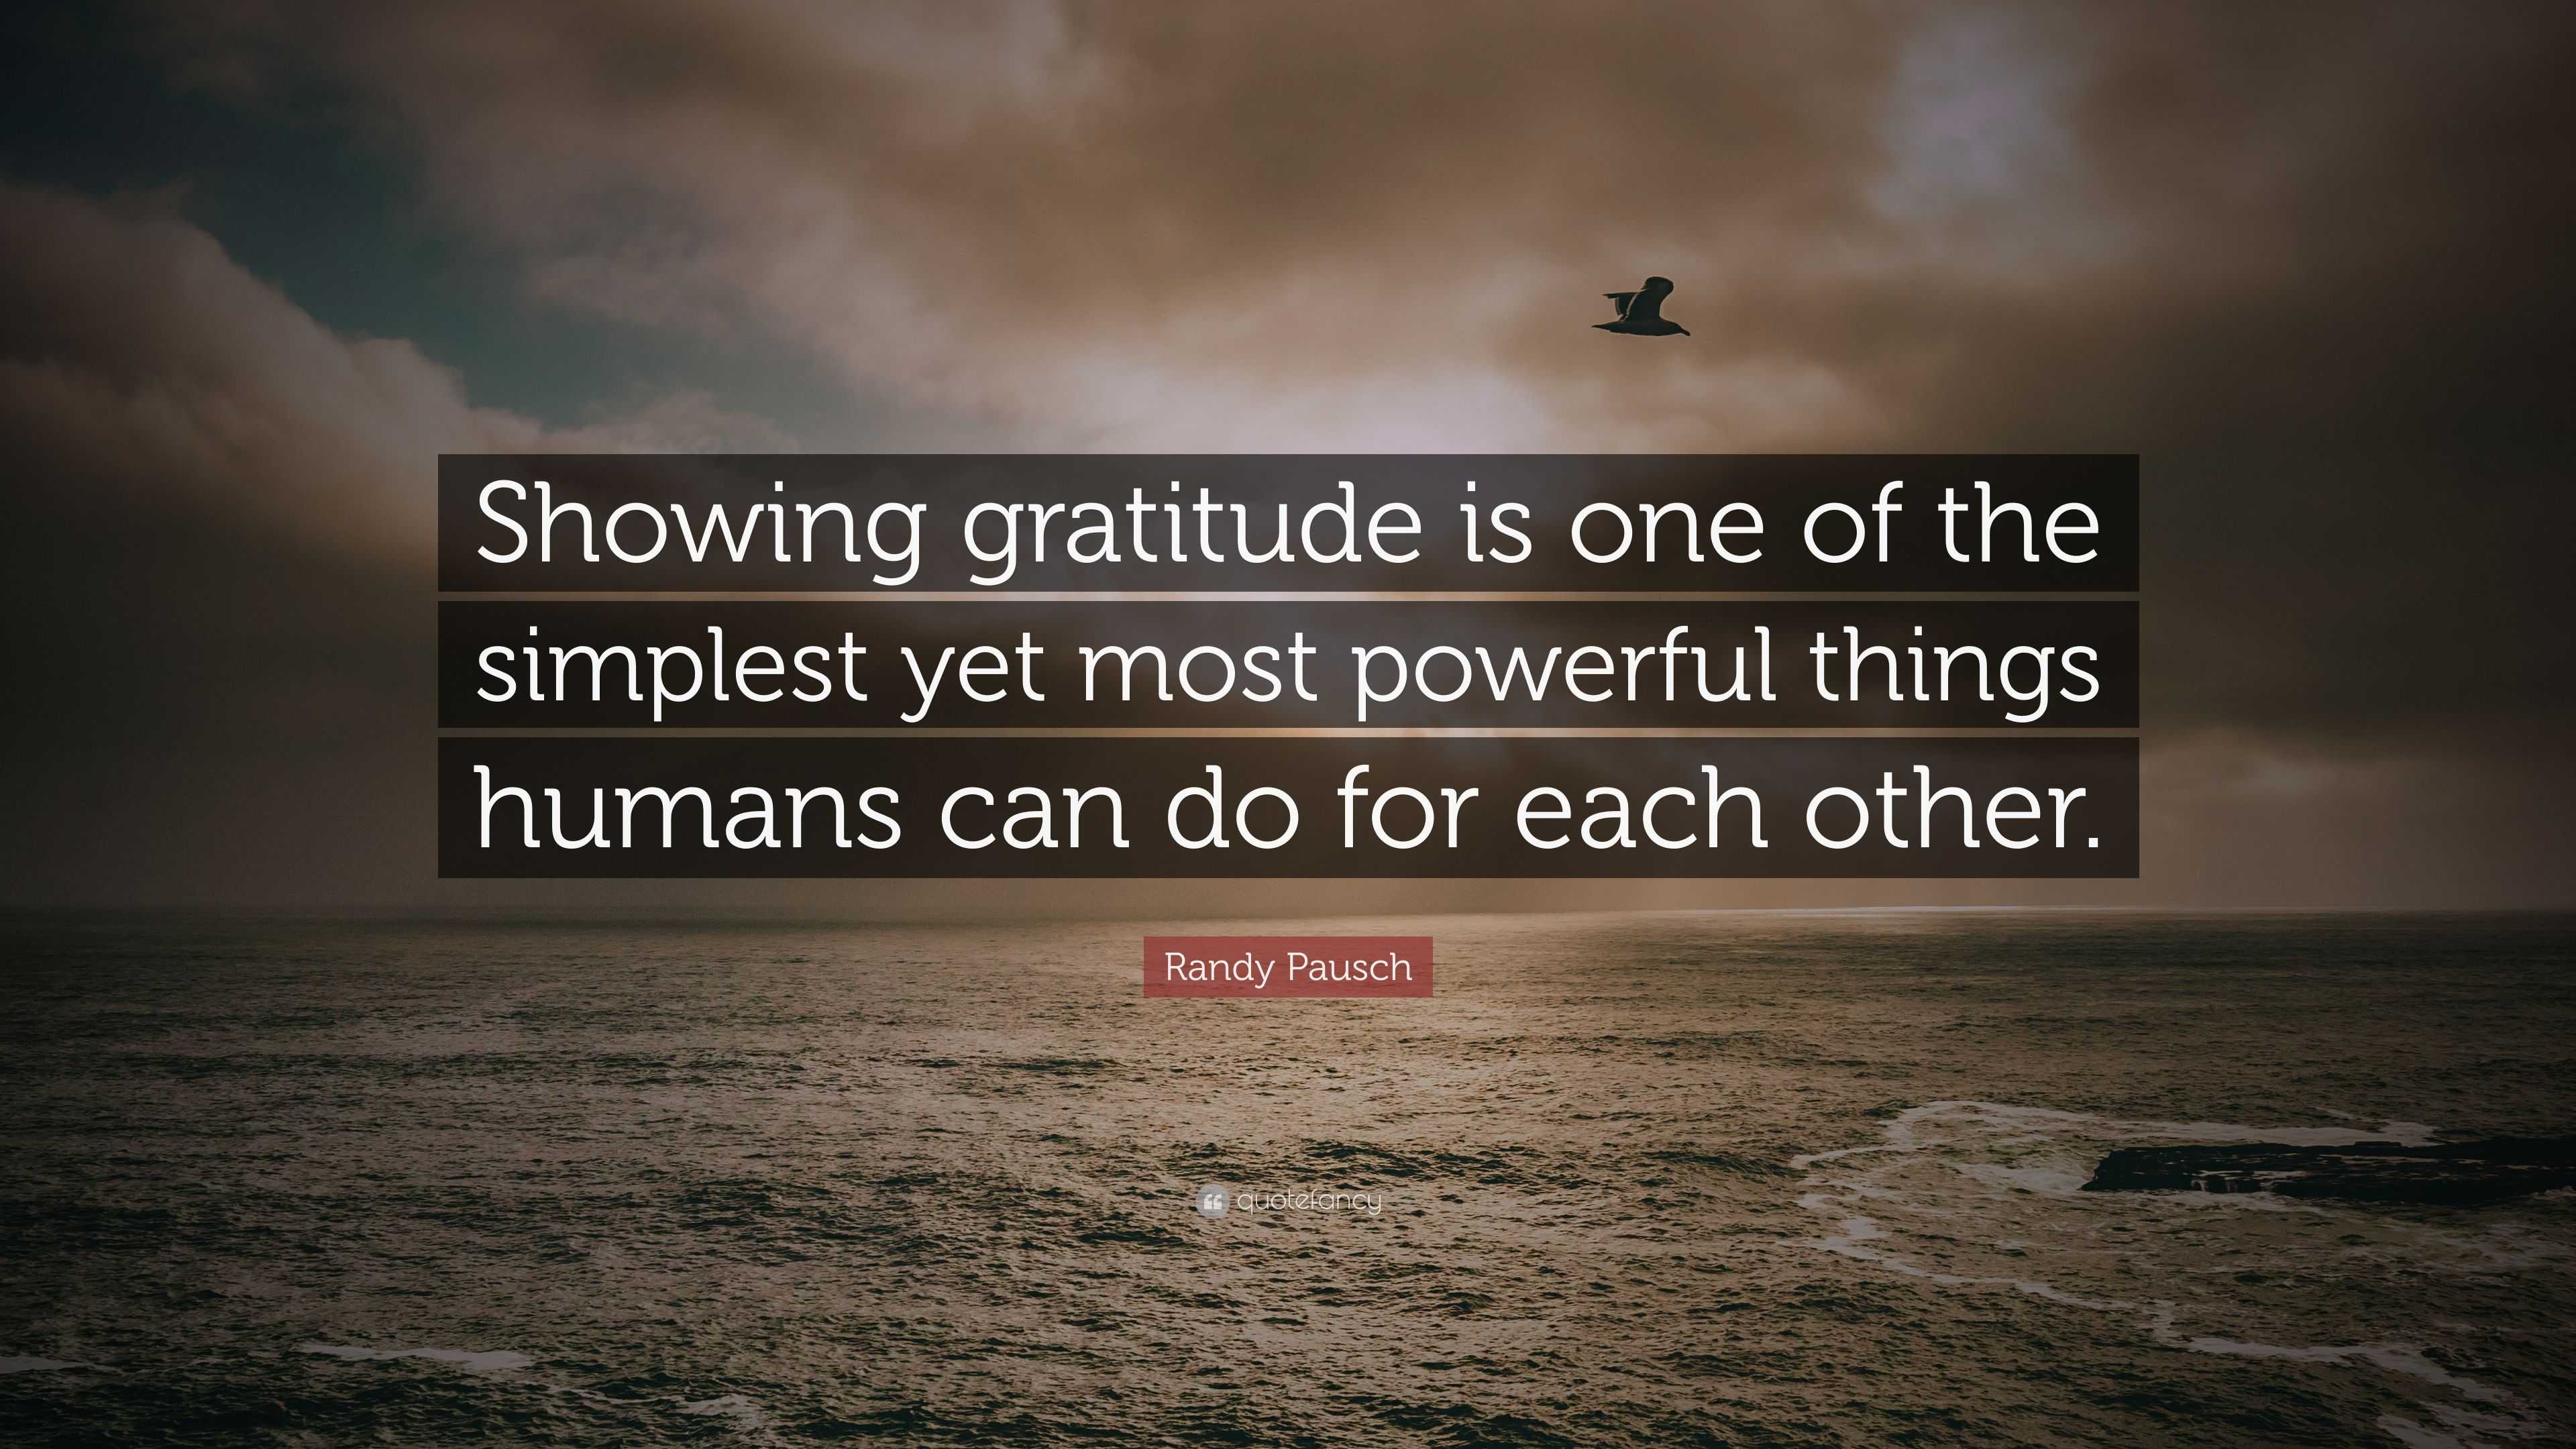 Randy Pausch Quote “Showing gratitude is one of the